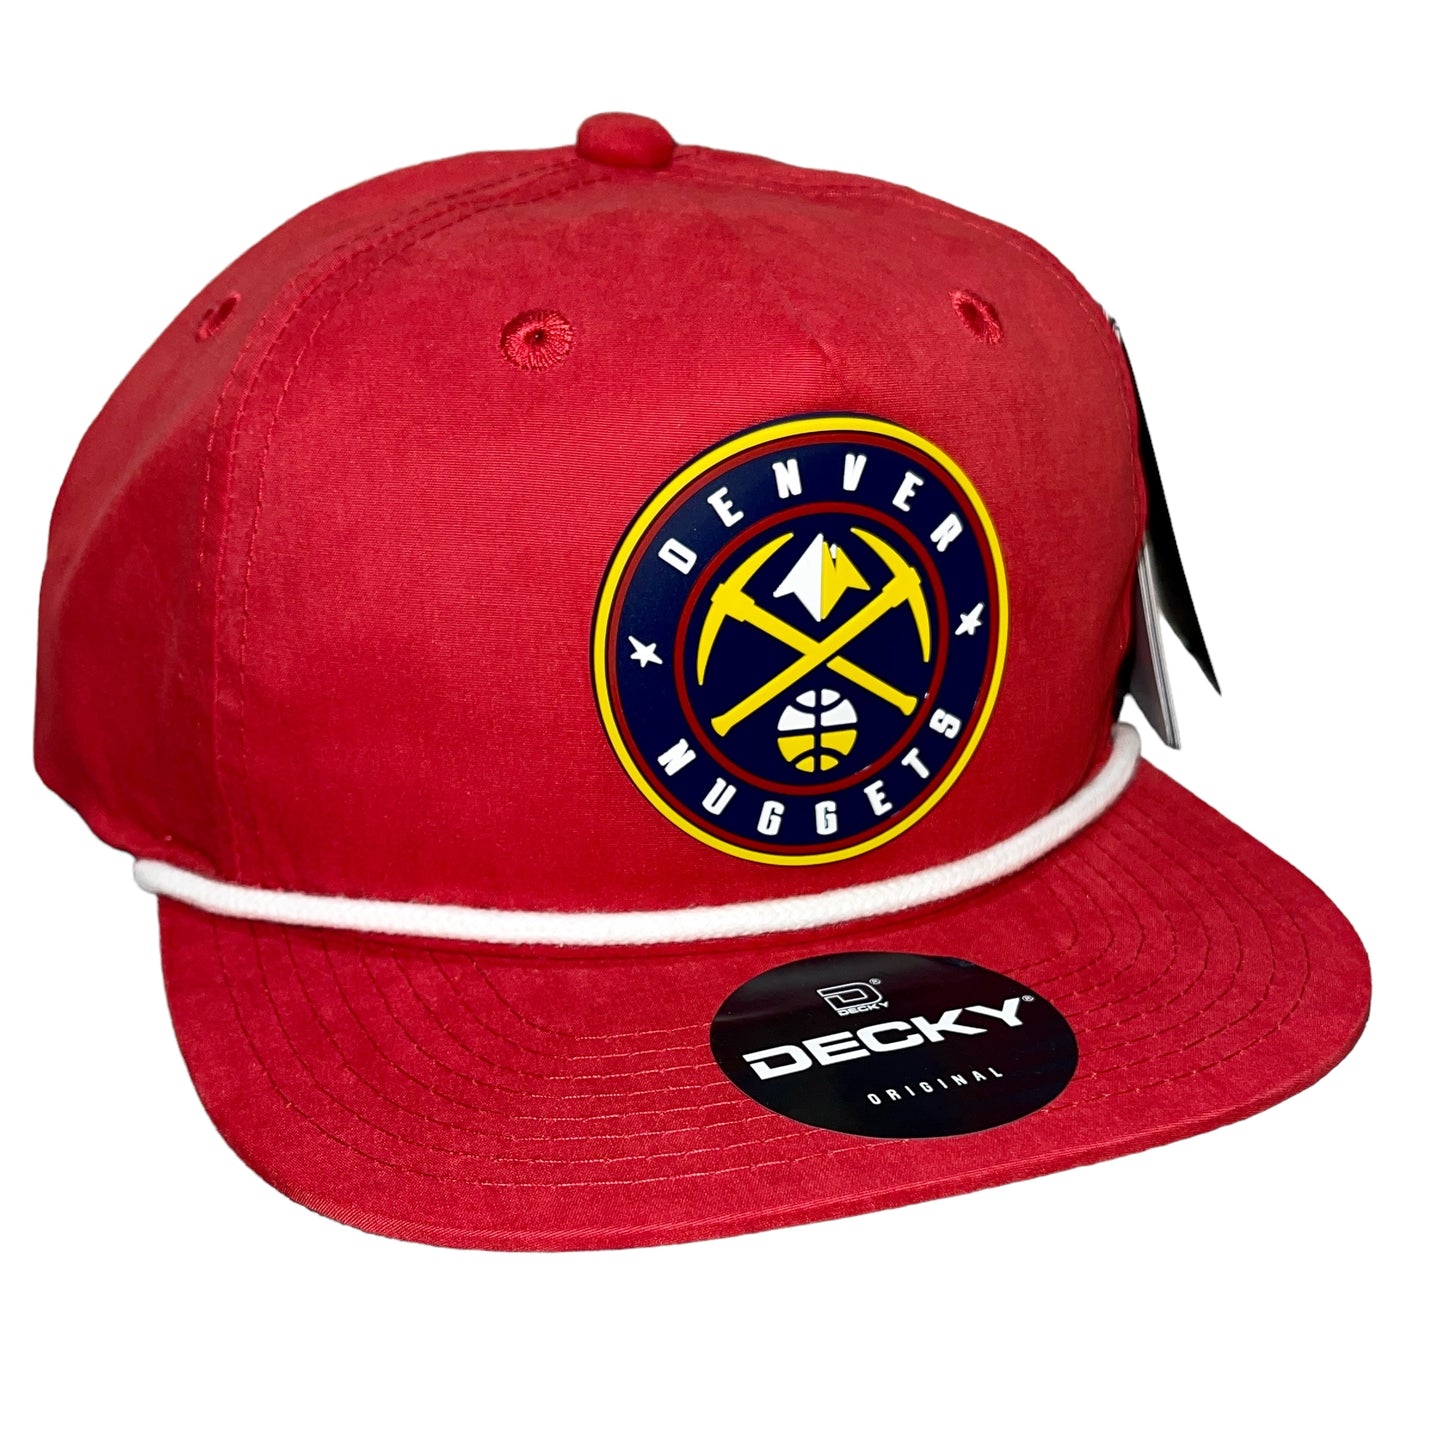 Denver Nuggets 3D Classic Rope Hat- Red/ White - Ten Gallon Hat Co.